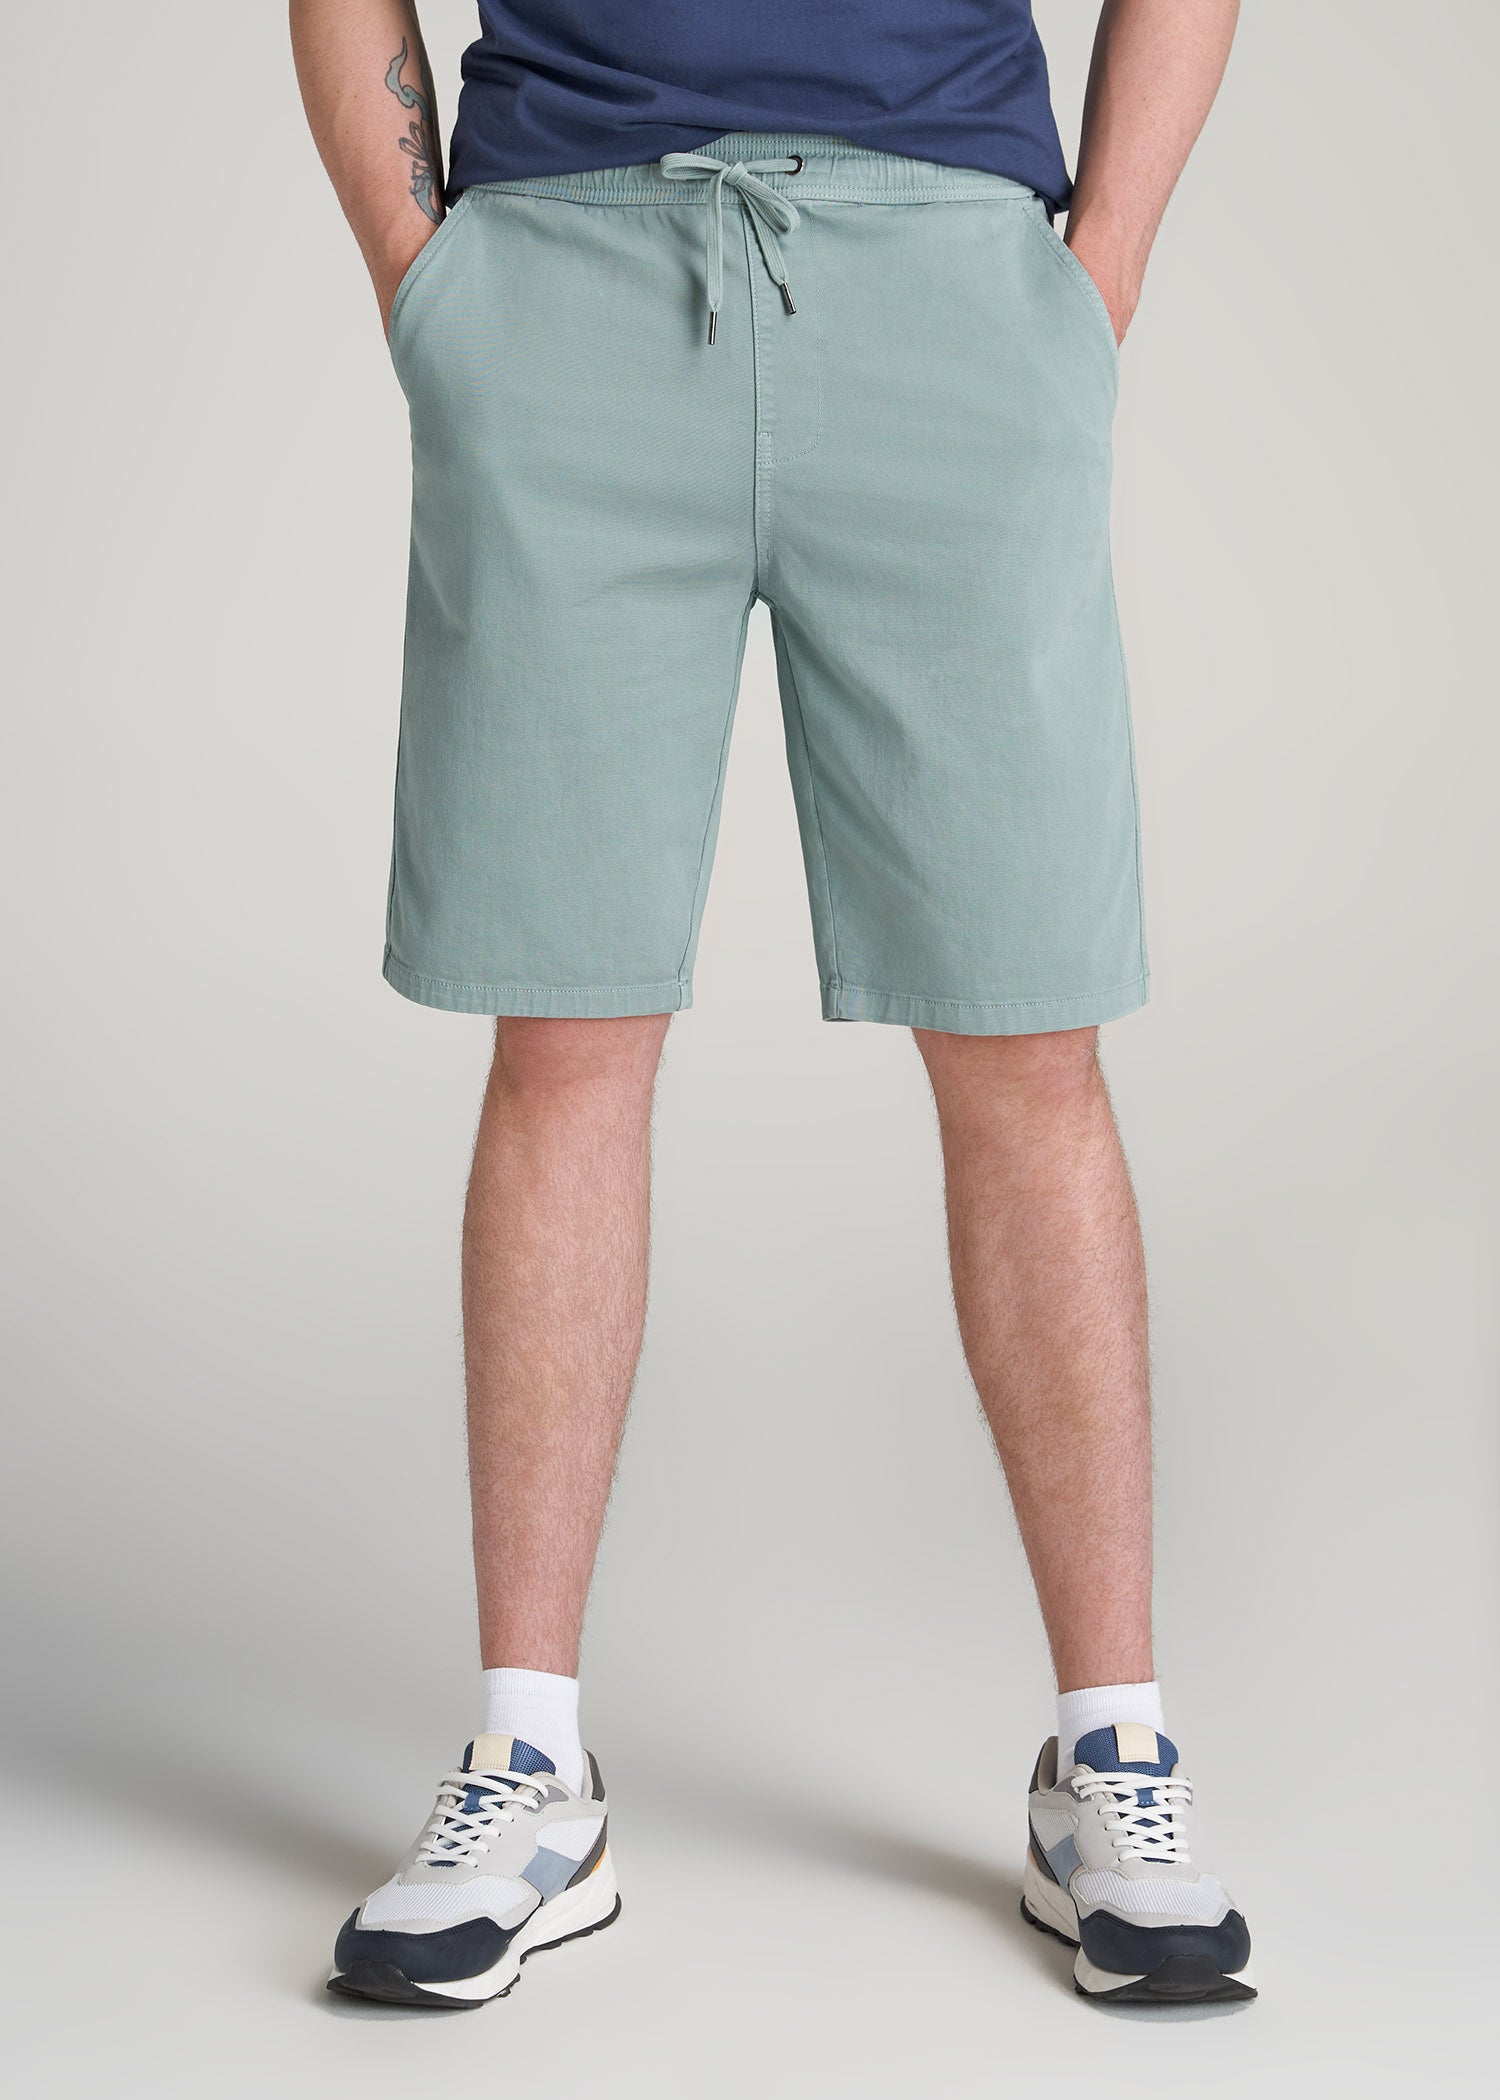 Stretch Twill Pull-On Shorts for Tall Men in Eucalyptus